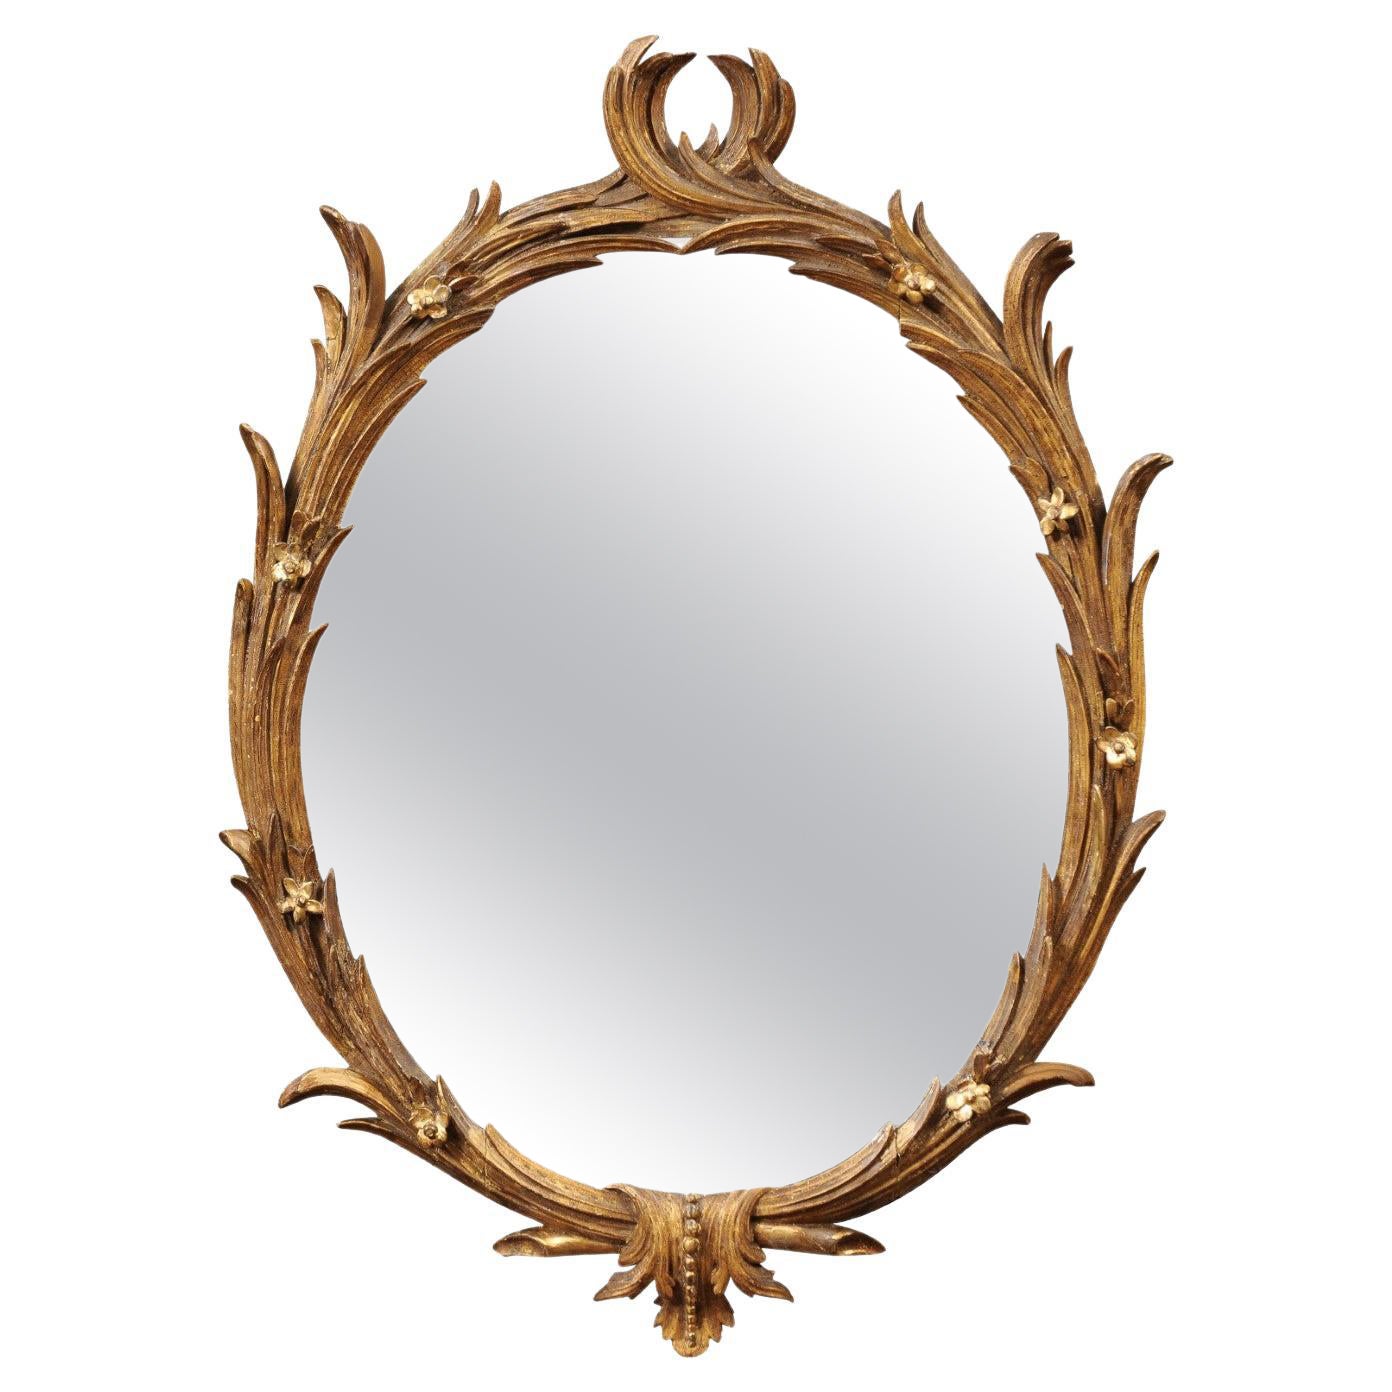 18th Century English Chippendale Oval Giltwood Mirror with foliage design